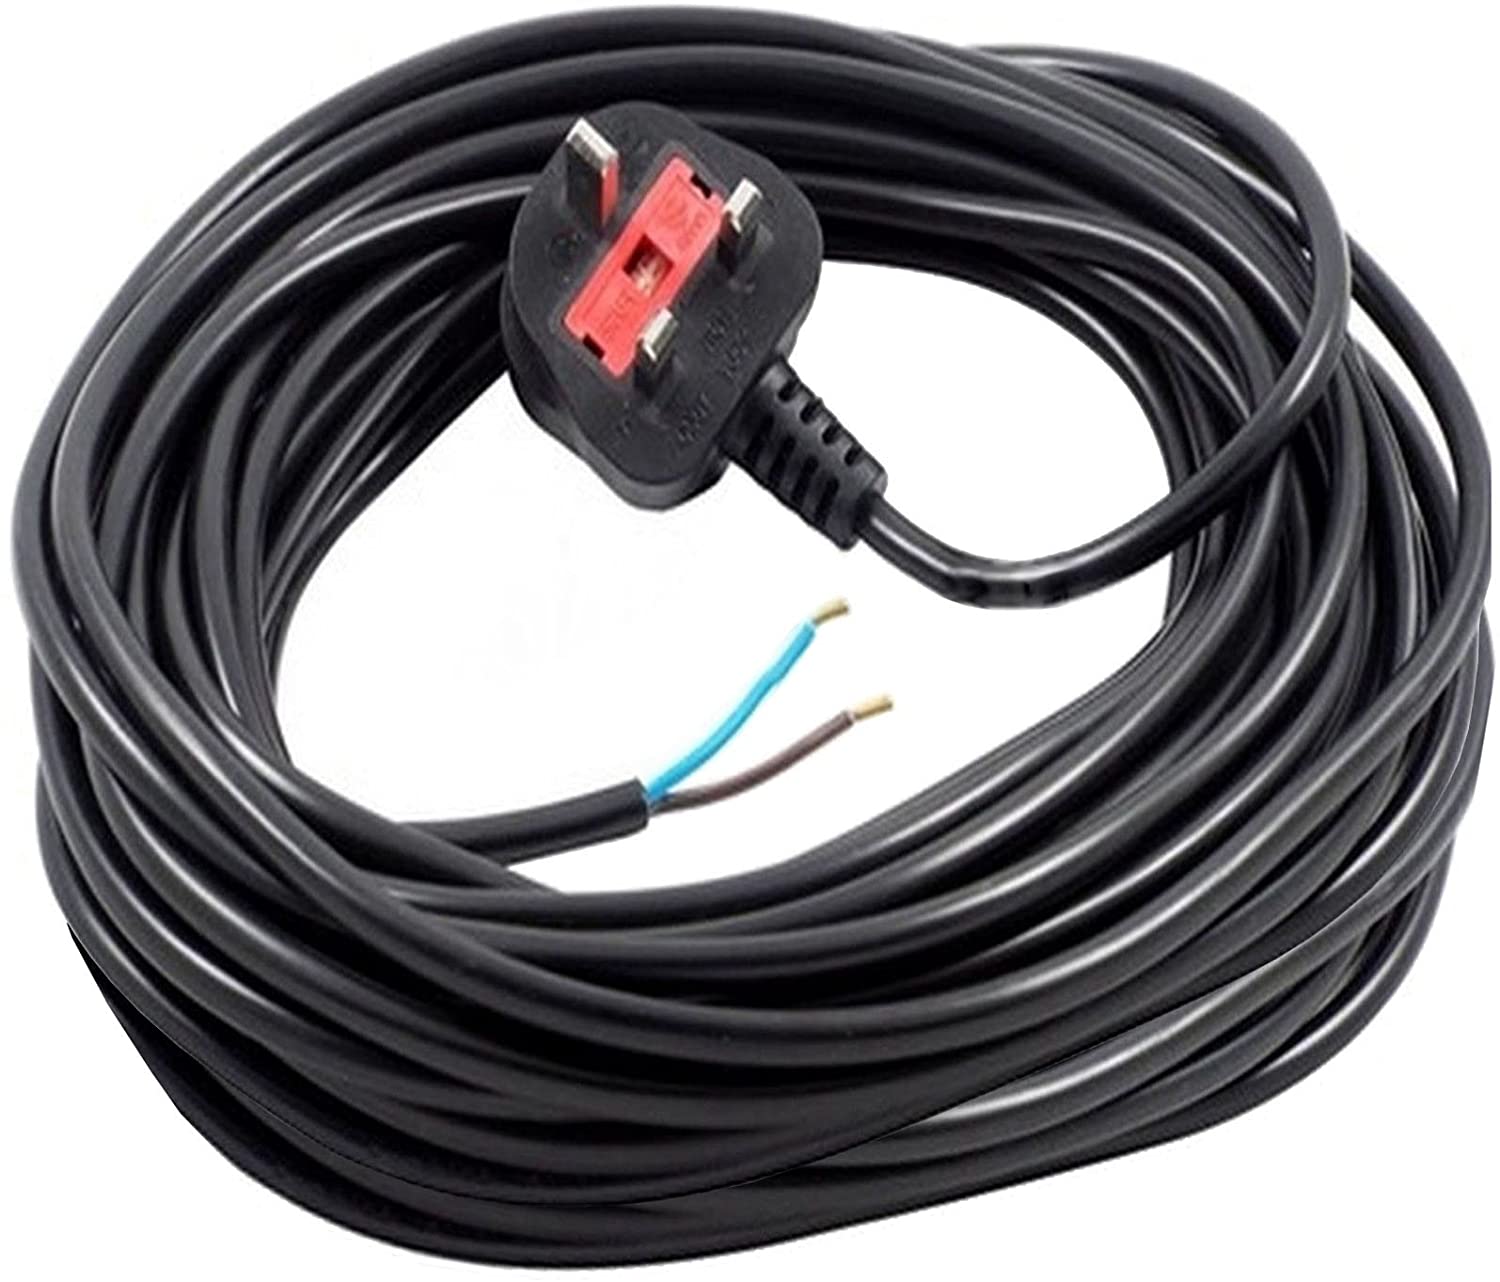 XL Extra Long Universal 12M Metre Mains Power Cable Lead for Lawnmower Strimmer Trimmer (UK Plug)